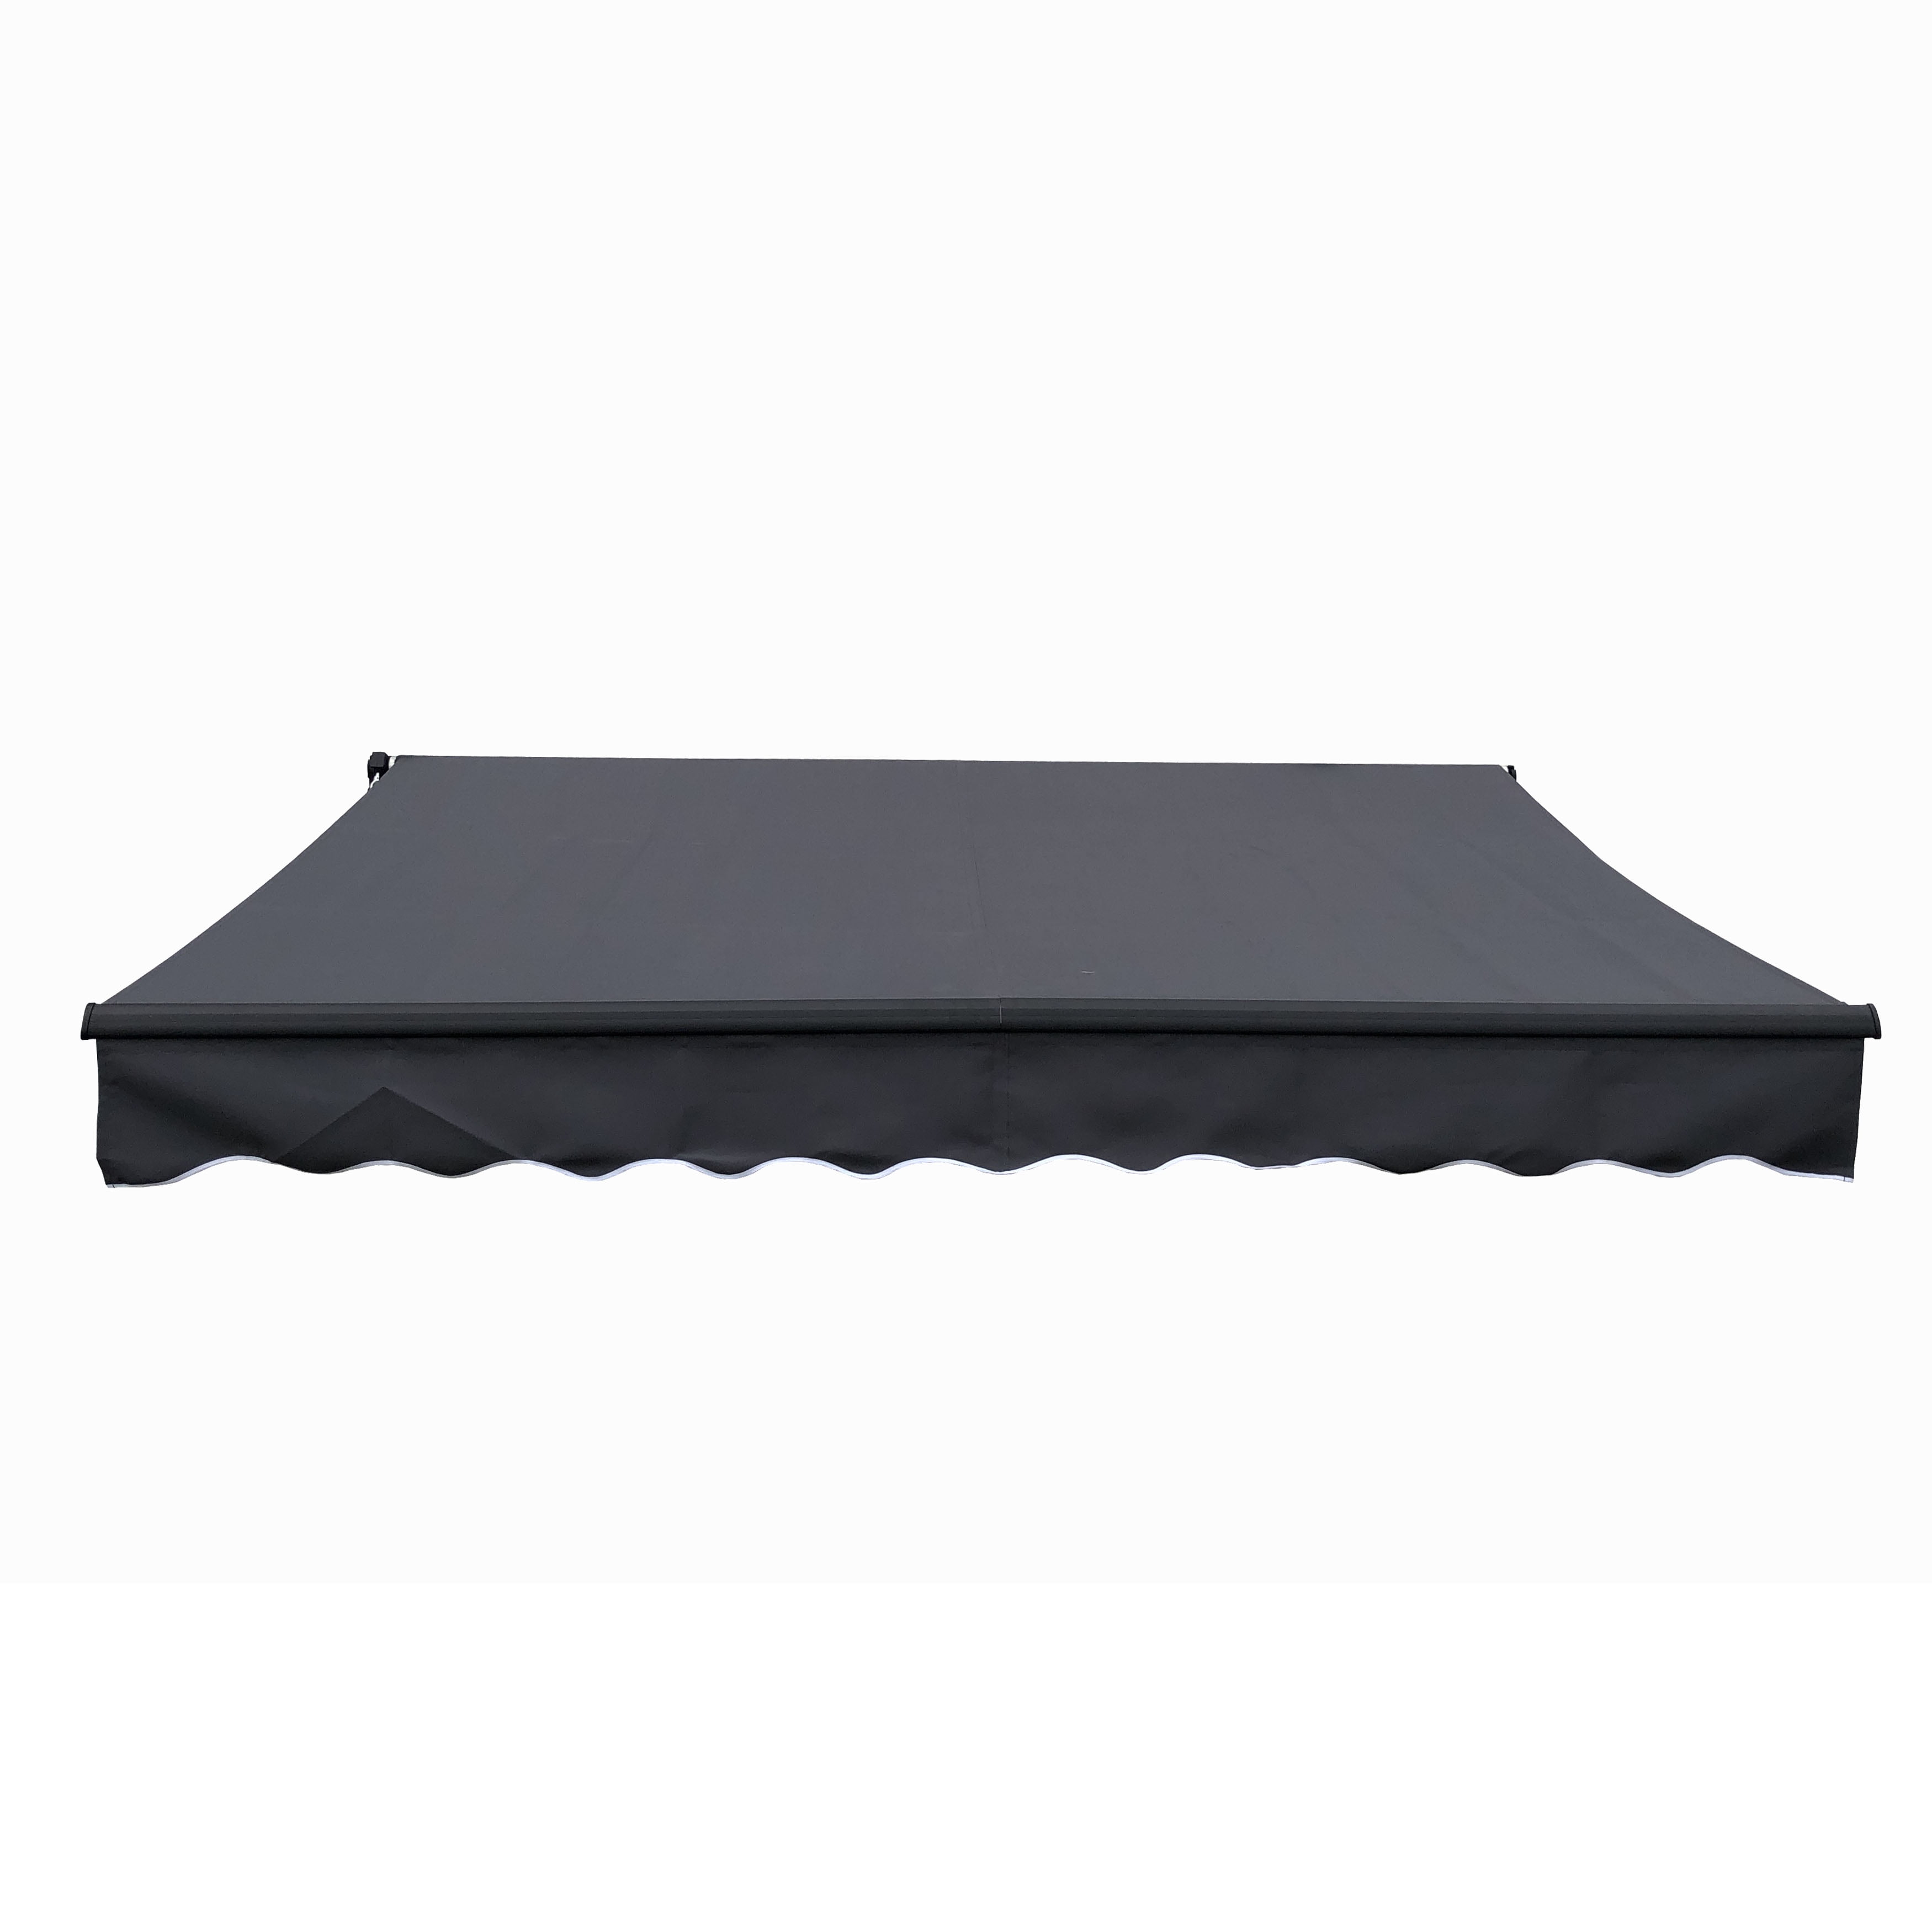 Ab12x10bk81 12 X 10 Ft. Black Frame Retractable Home Patio Canopy Awning, Black